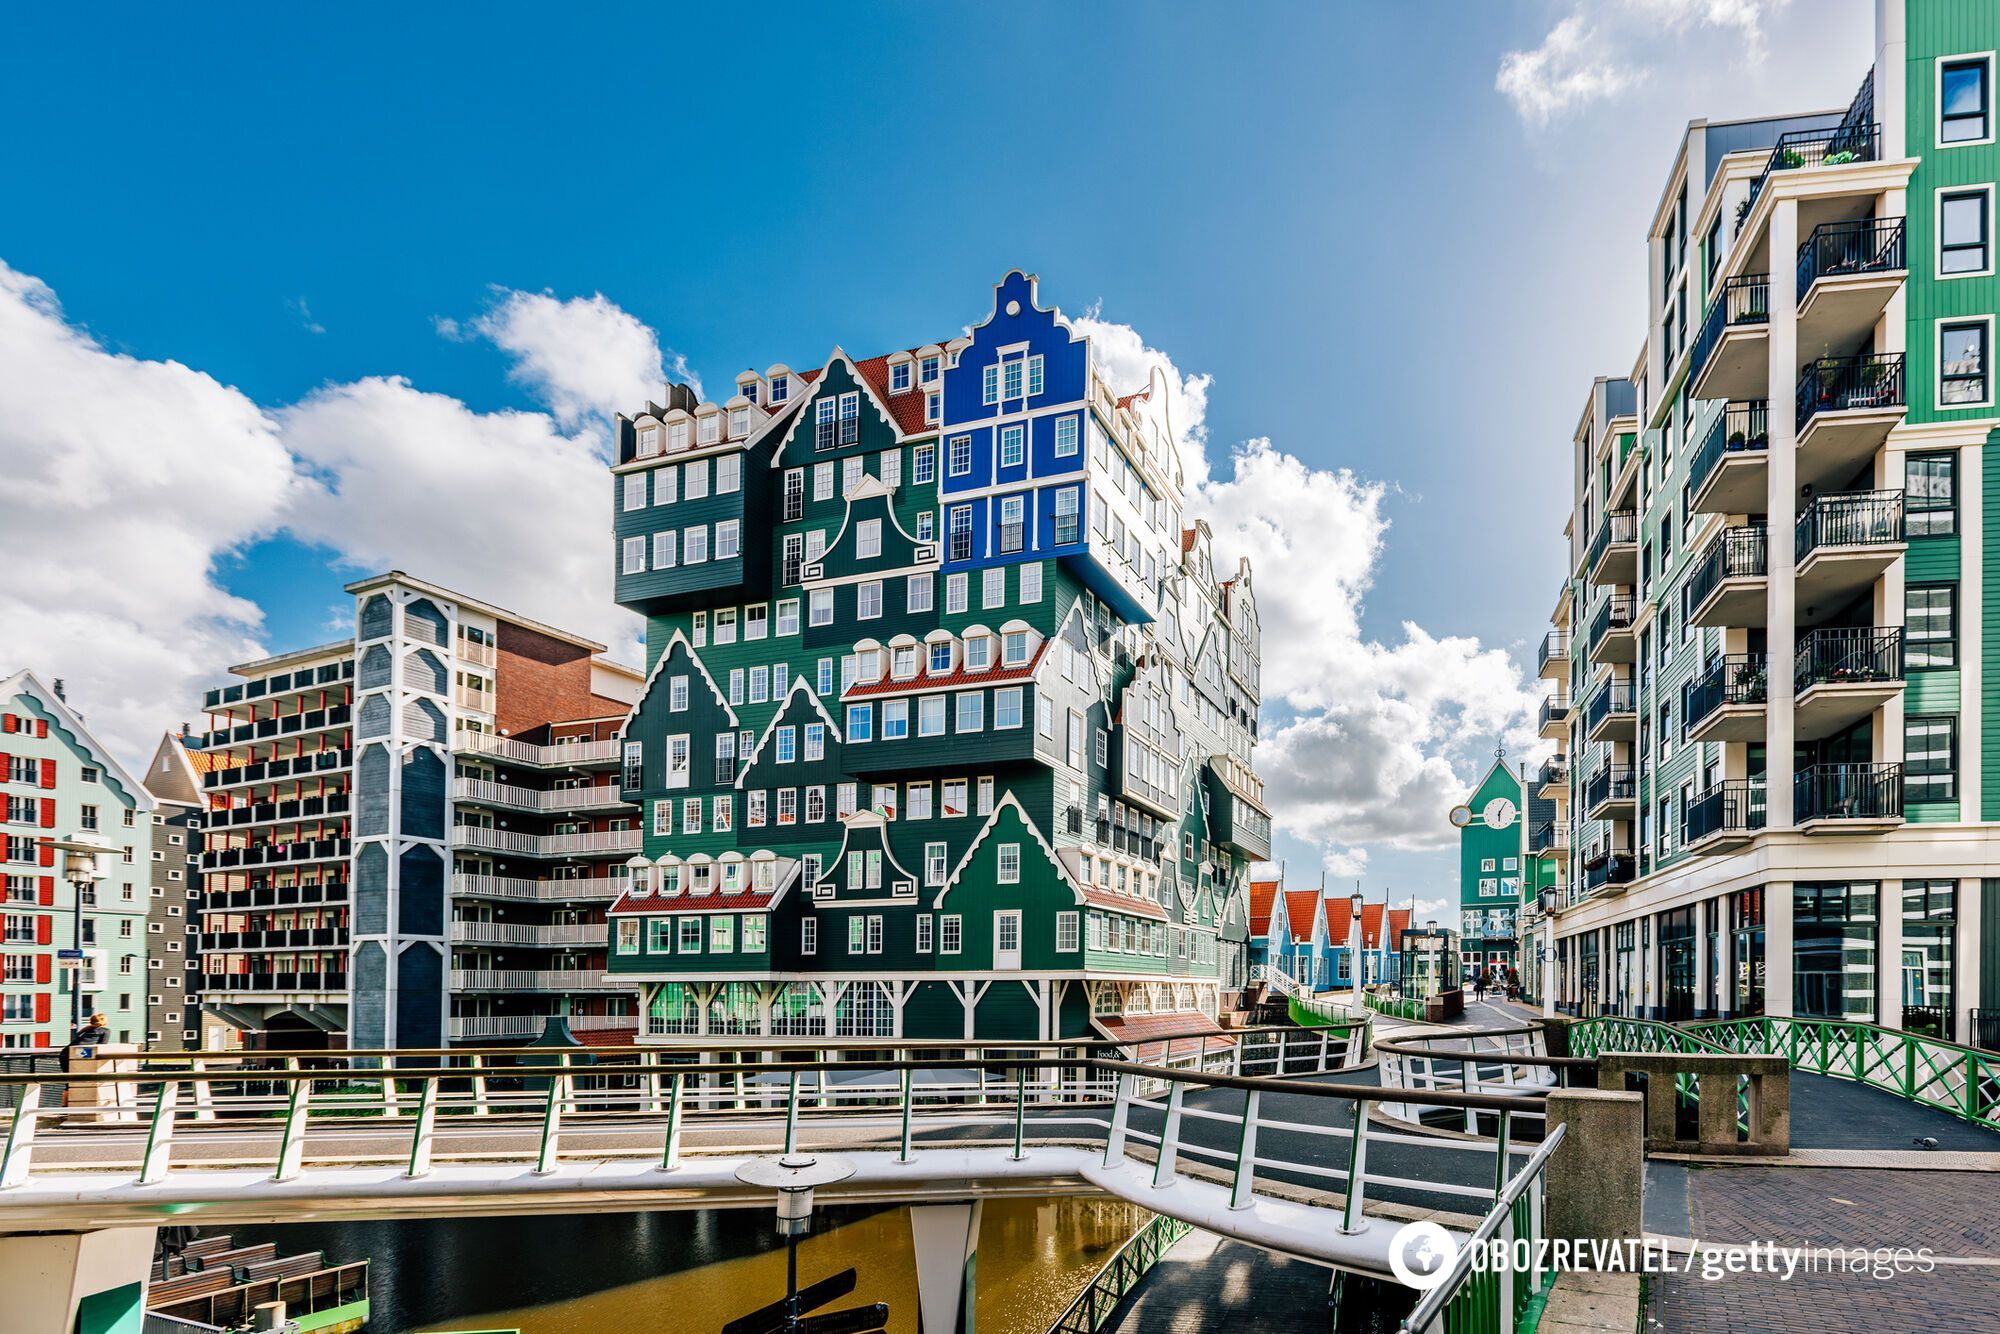 It looks like a Lego set. What does an unusual city in Europe, which is called a cheap alternative to Amsterdam, look like?